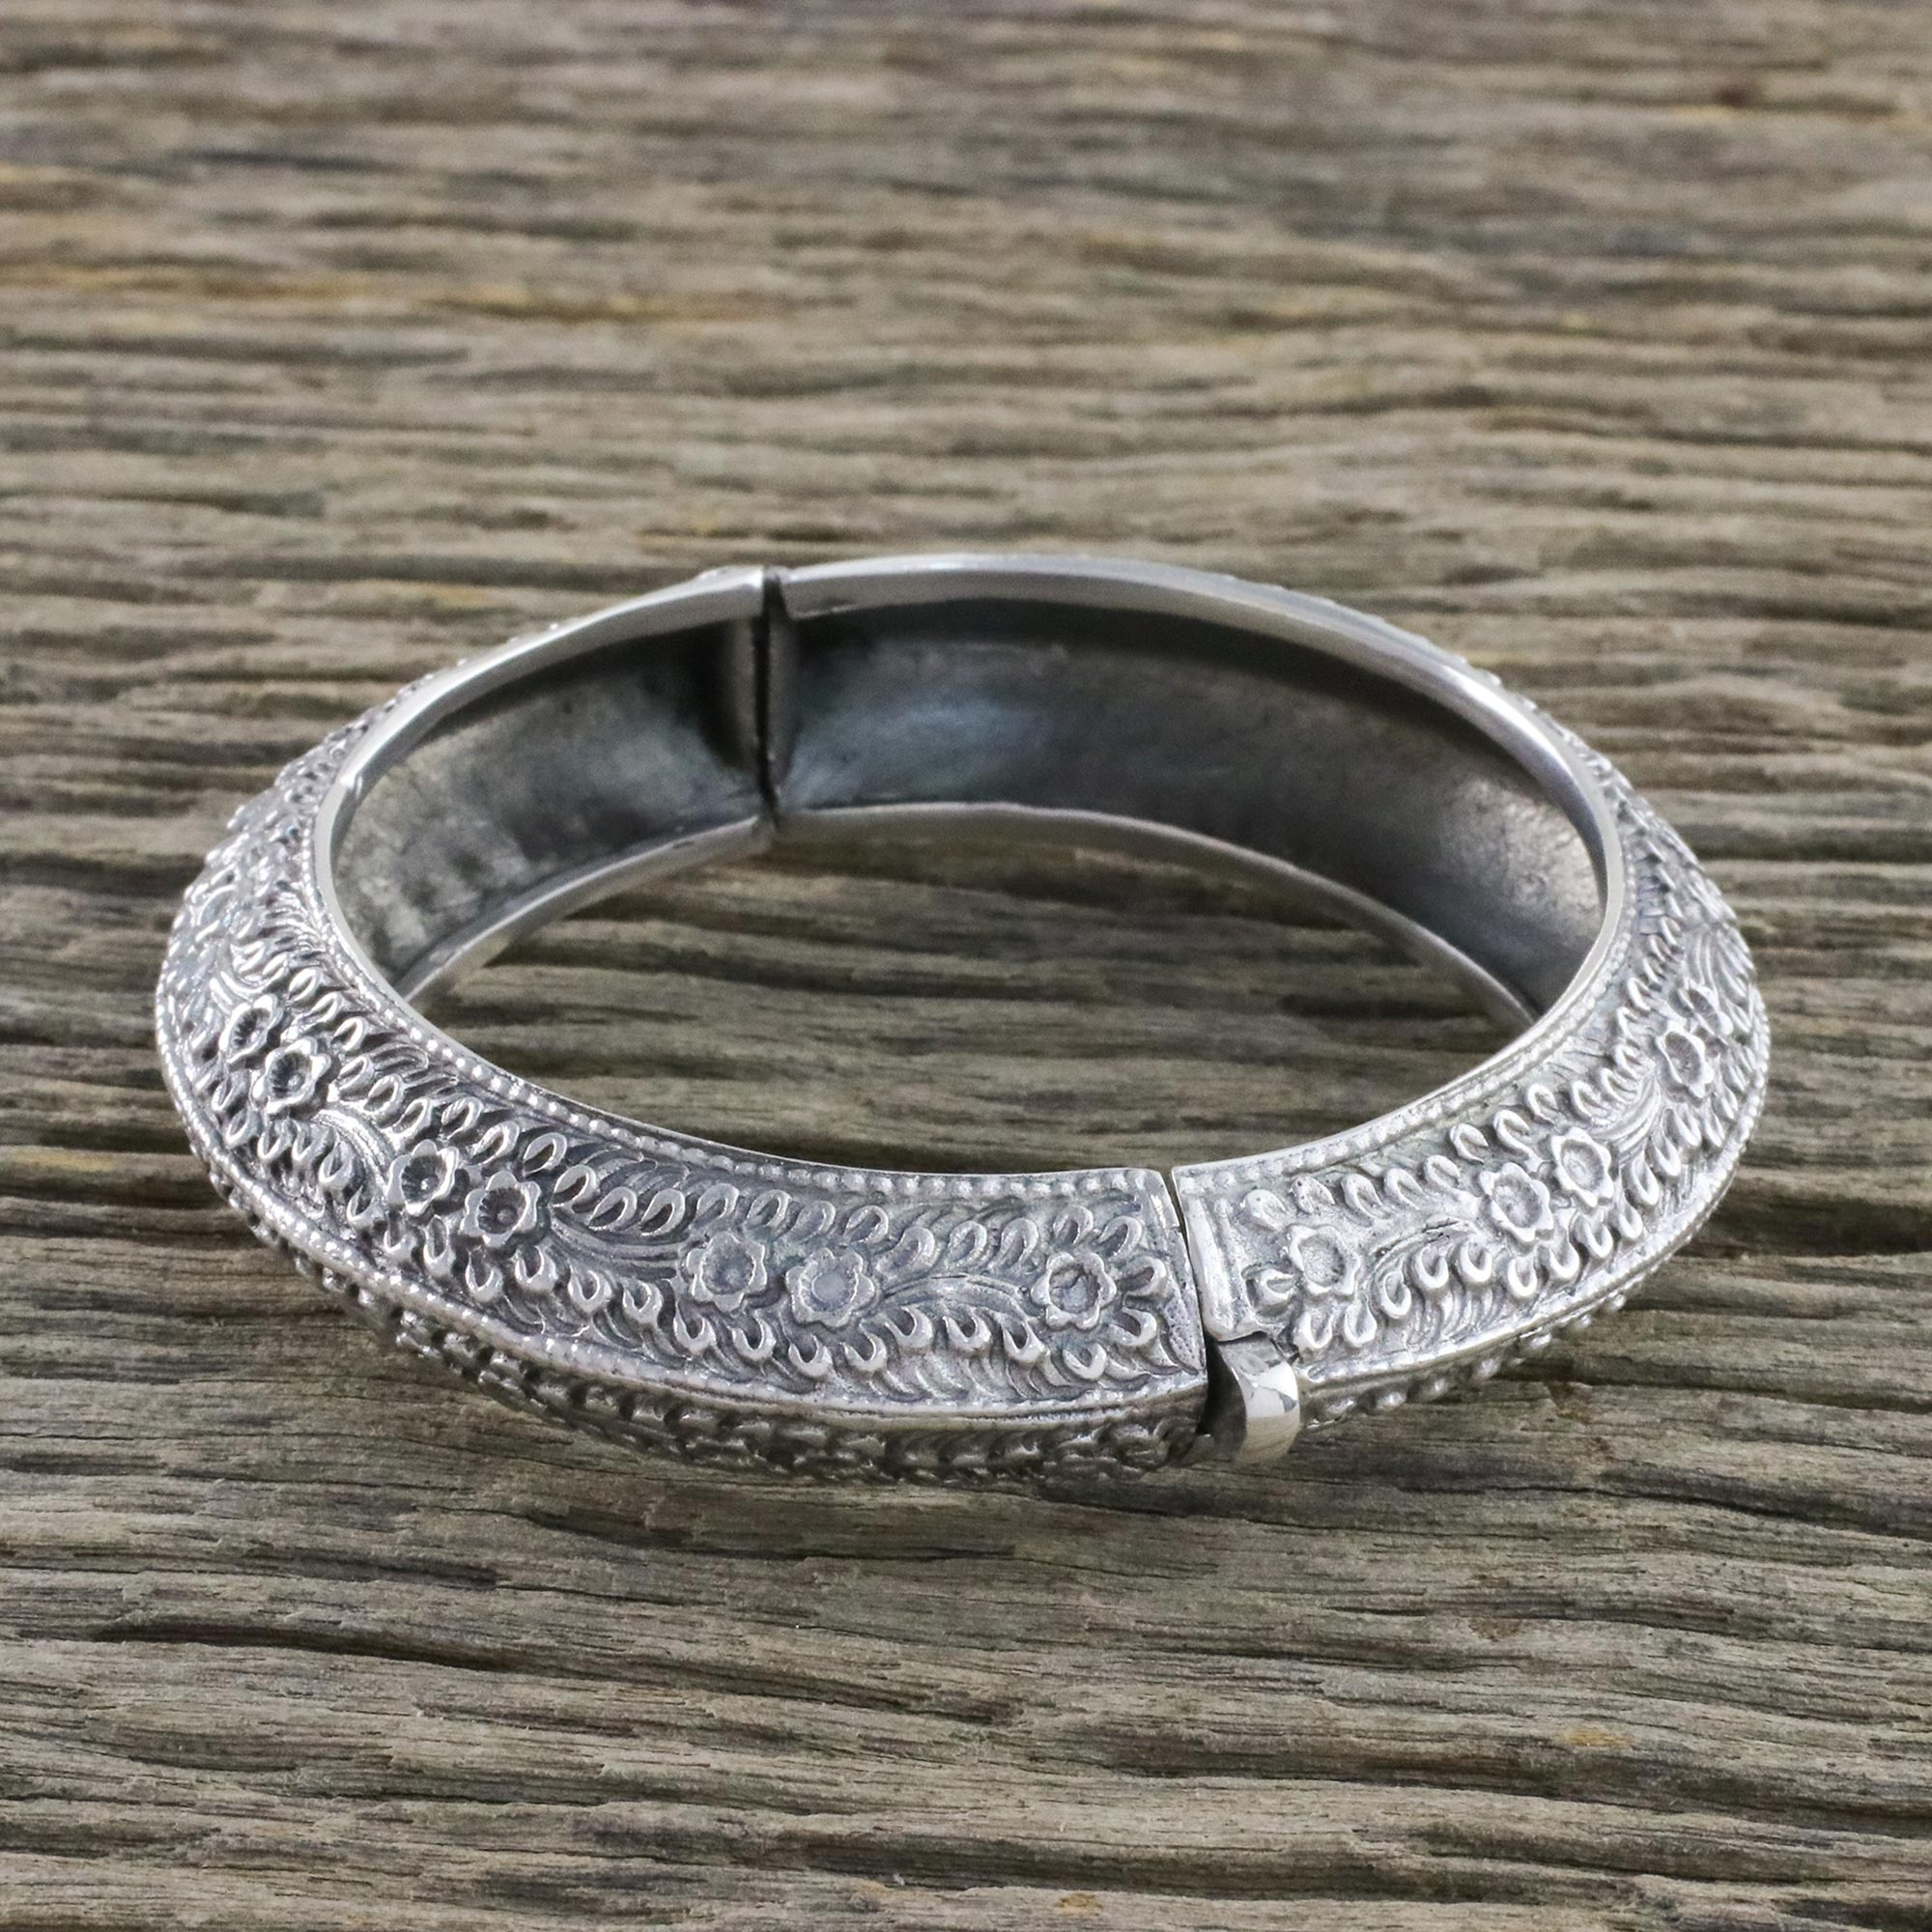 Floral Motif Sterling Silver Bangle Bracelet from Thailand - Dainty ...